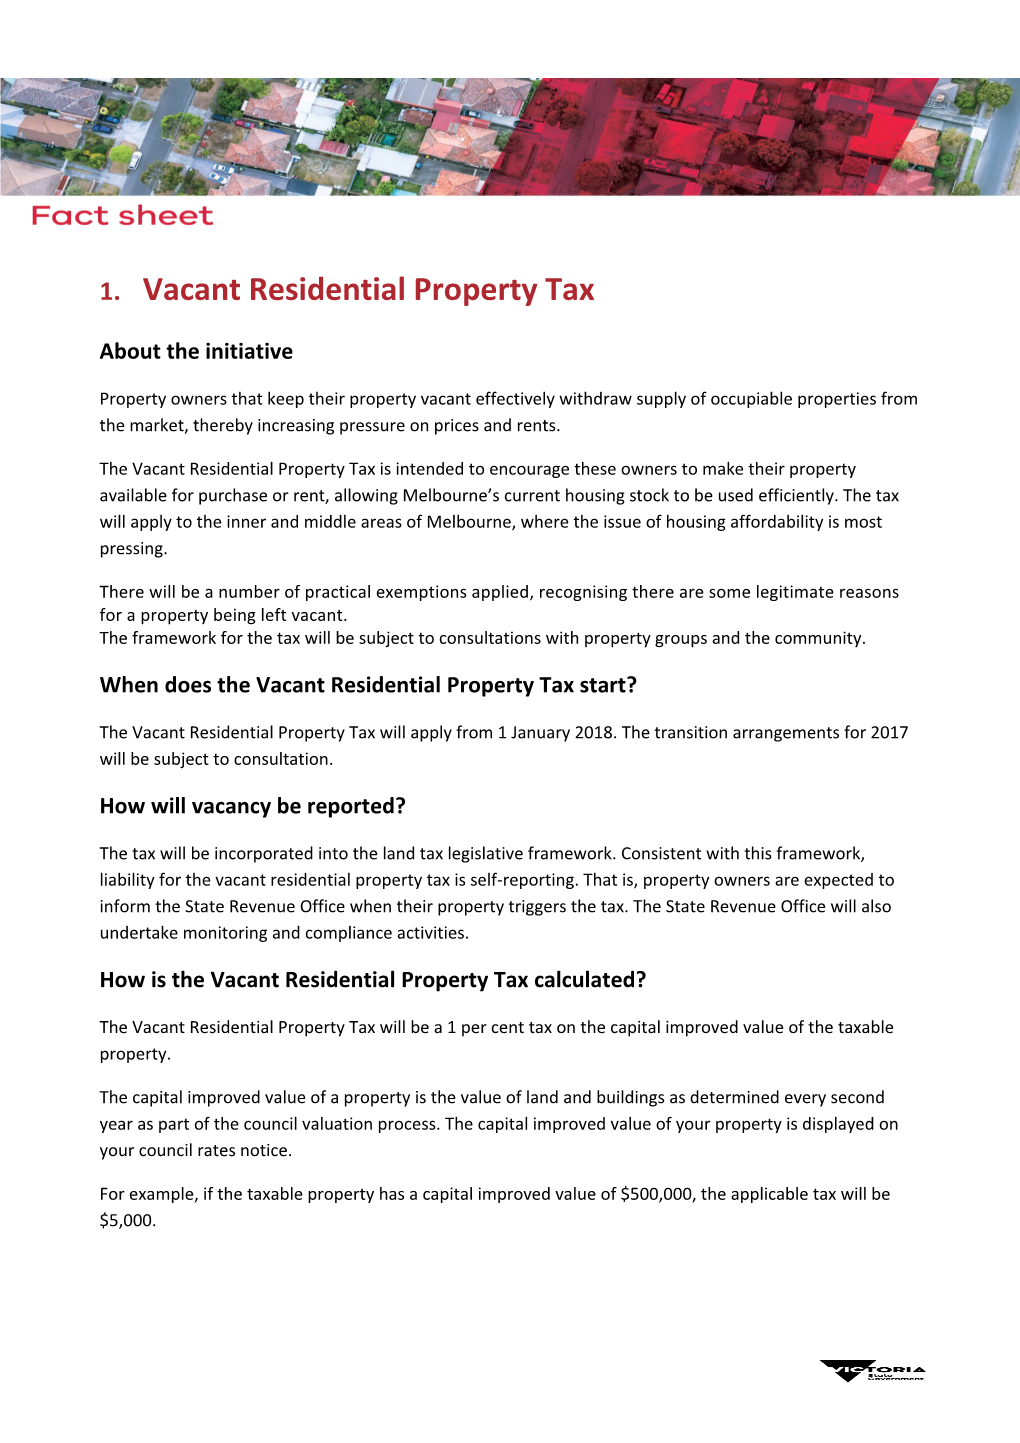 Vacant Residential Property Tax